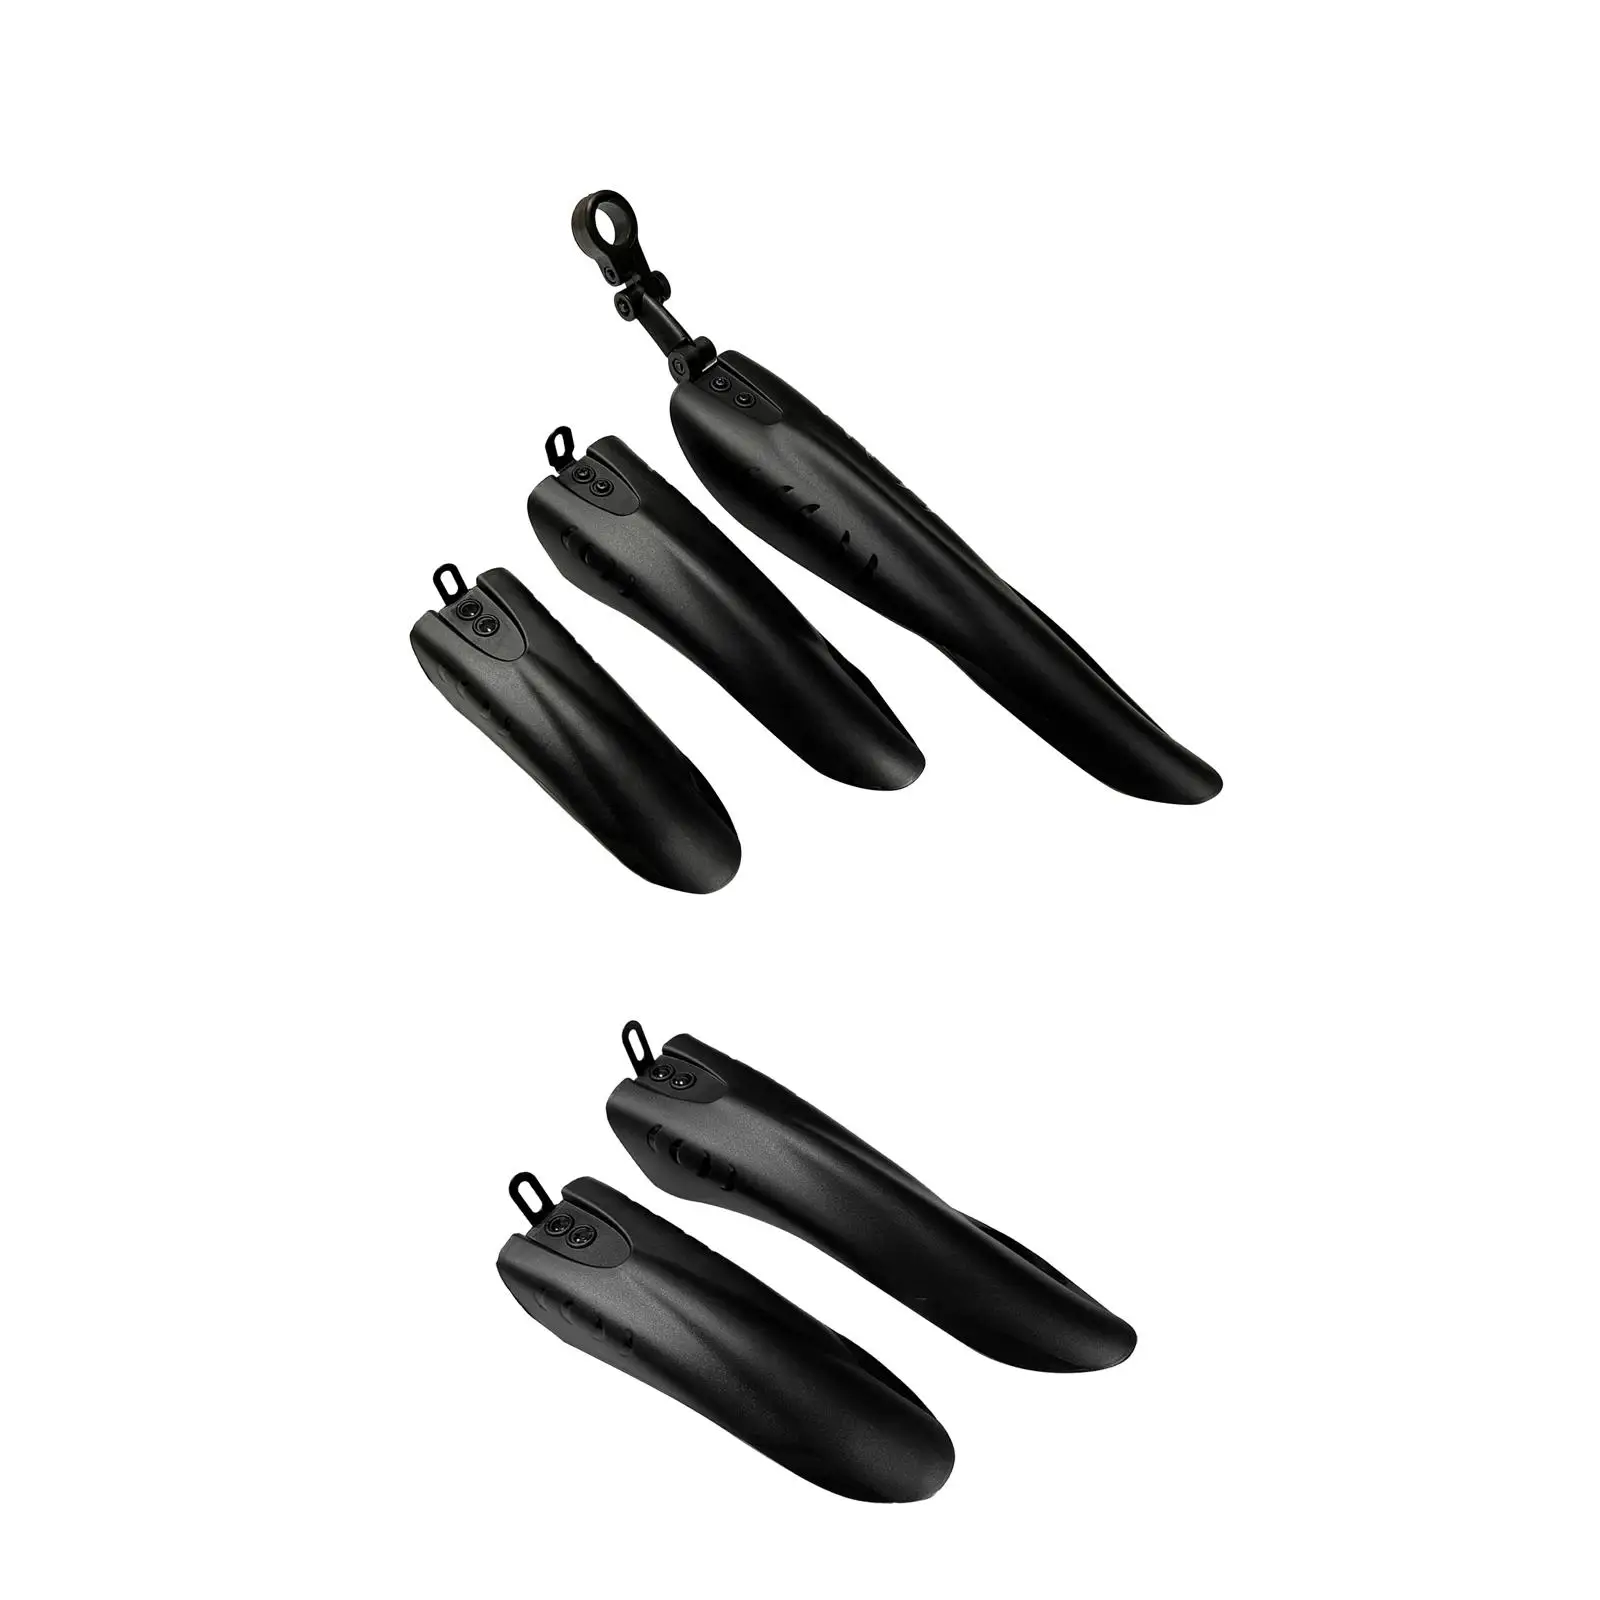 Bike Mudguard Front Rear Set Easy to Install Repair Parts Accs Replaces Mudflap for Mountain Bike Riding Outdoor Sports